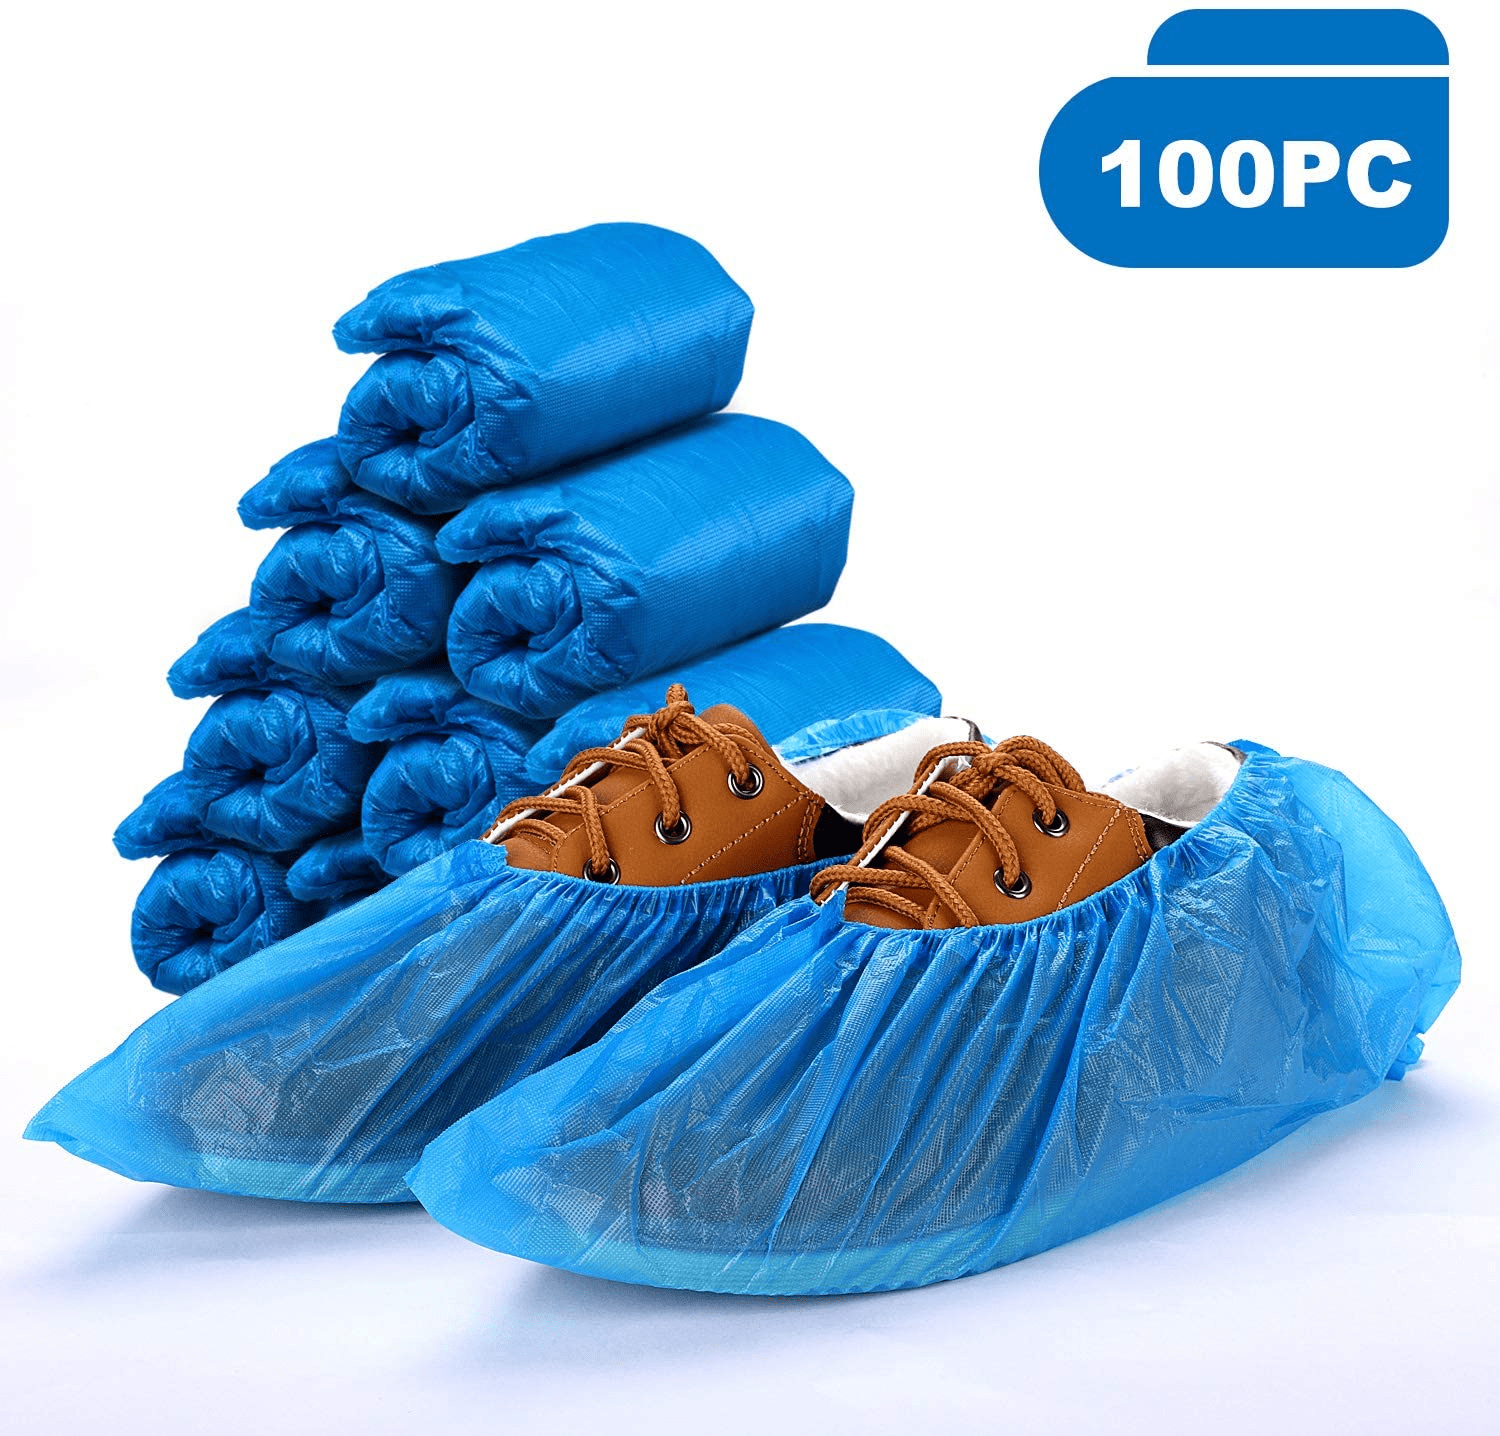 Chennie 100pcs/lot Shoe Covers Disposable Waterproof Plastic Boot Protector Overshoes for Home Office 